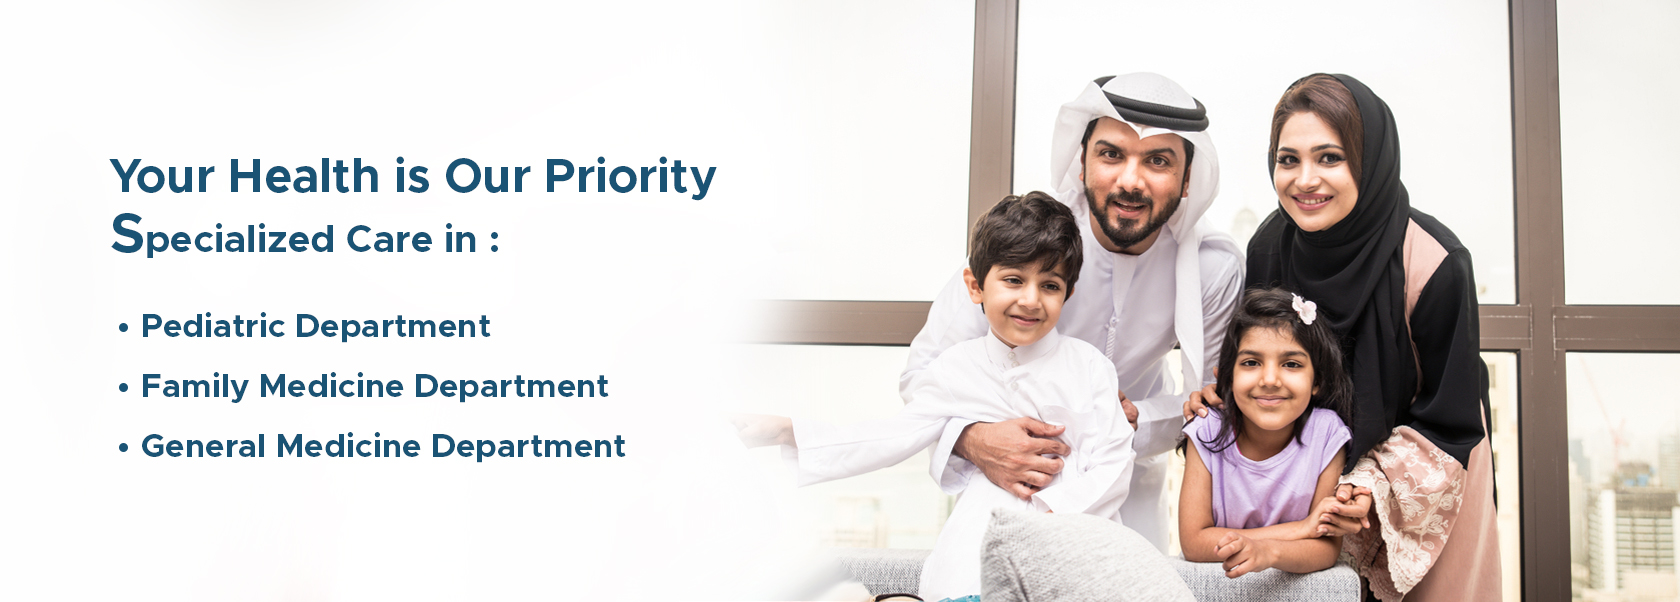 Your Health is Our Priority ,Specialized Care in Pediatric Department Family Medicine Department General Medicine Department